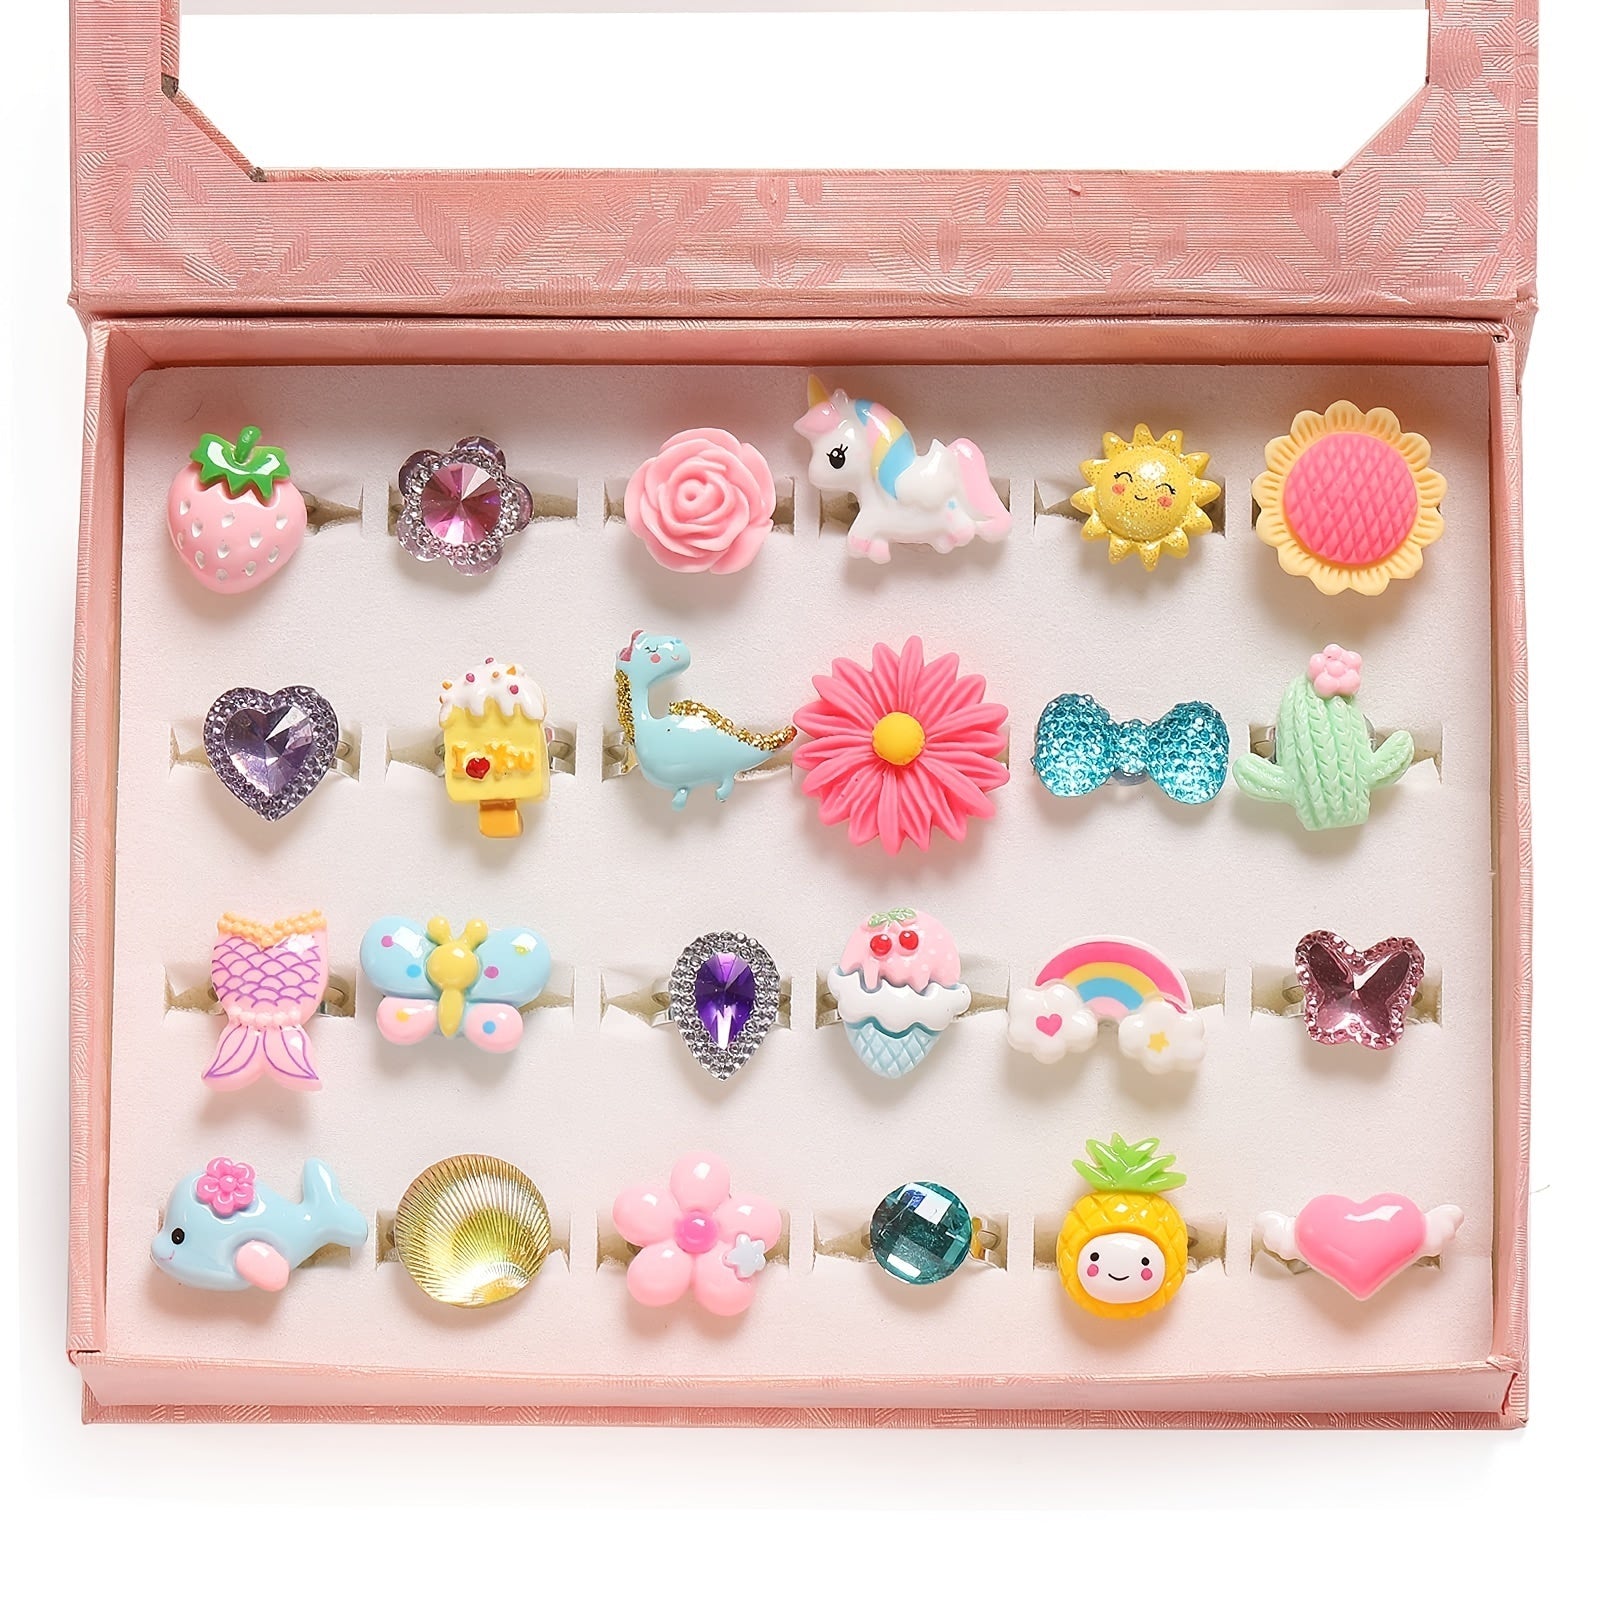 Little Girl Jewel Rings In Box, Adjustable, No Duplication, Girl Pretend Play And Dress Up Rings (24 Lovely Ring)